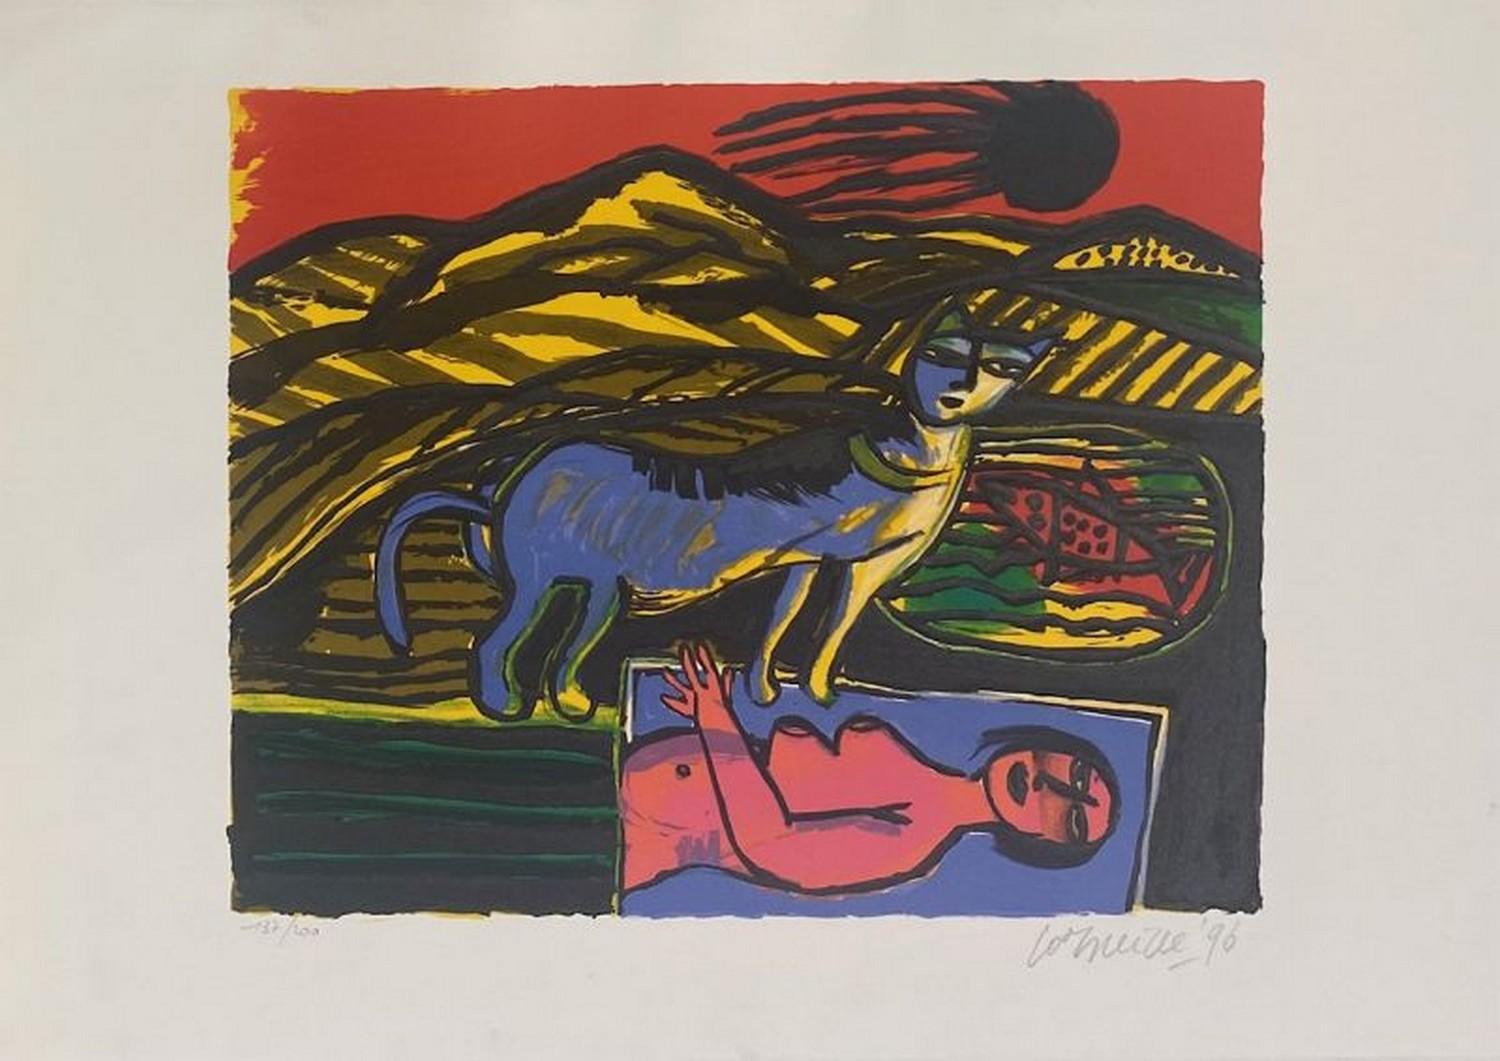 Guillaume Corneille Abstract Print - Blue cat